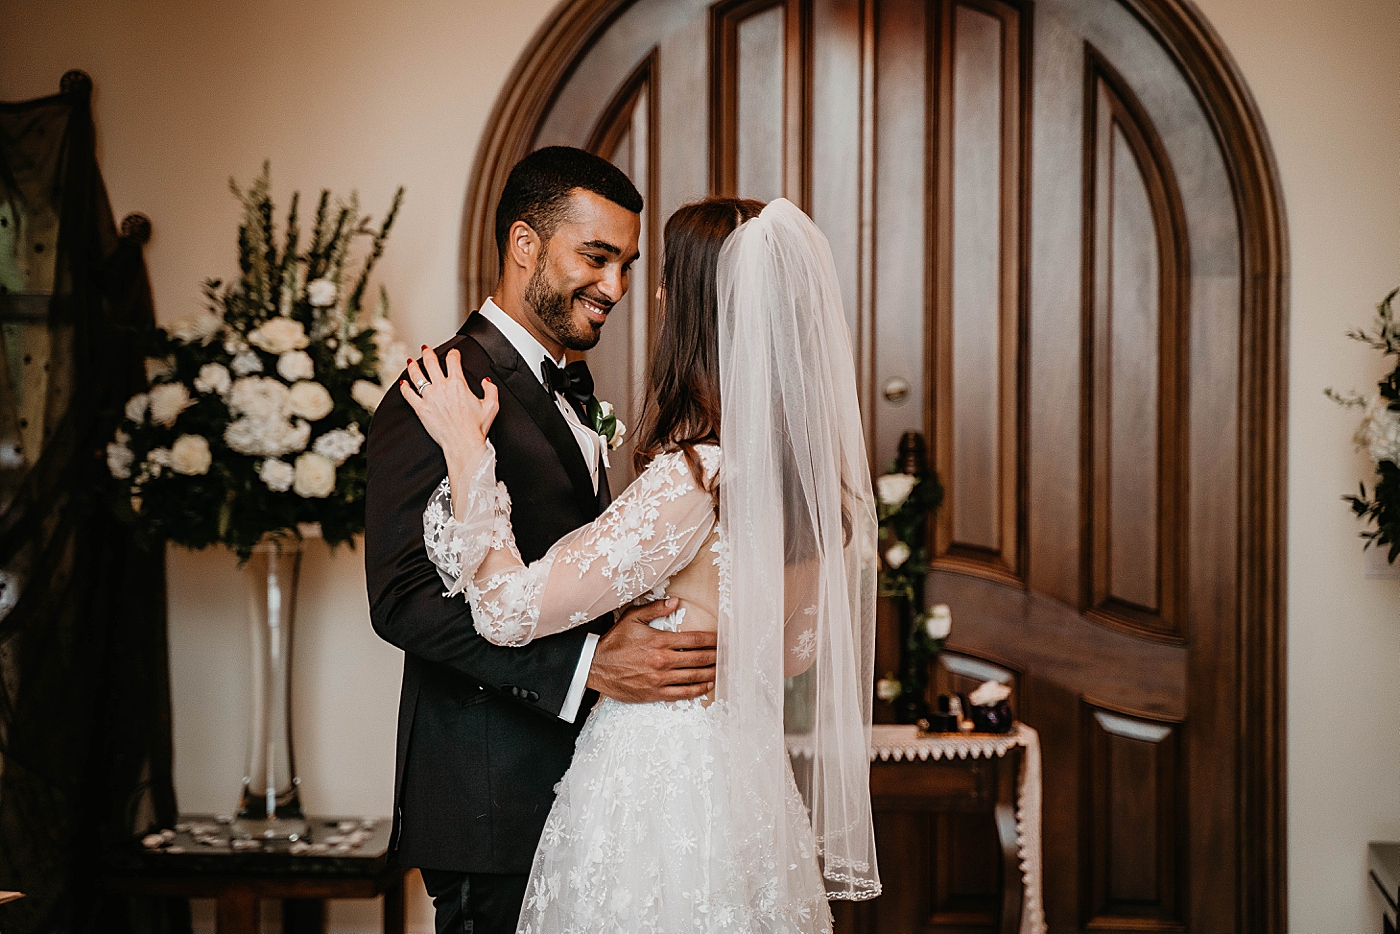 First dance Intimate Home Wedding captured by South Florida Wedding Photographer Krystal Capone Photography